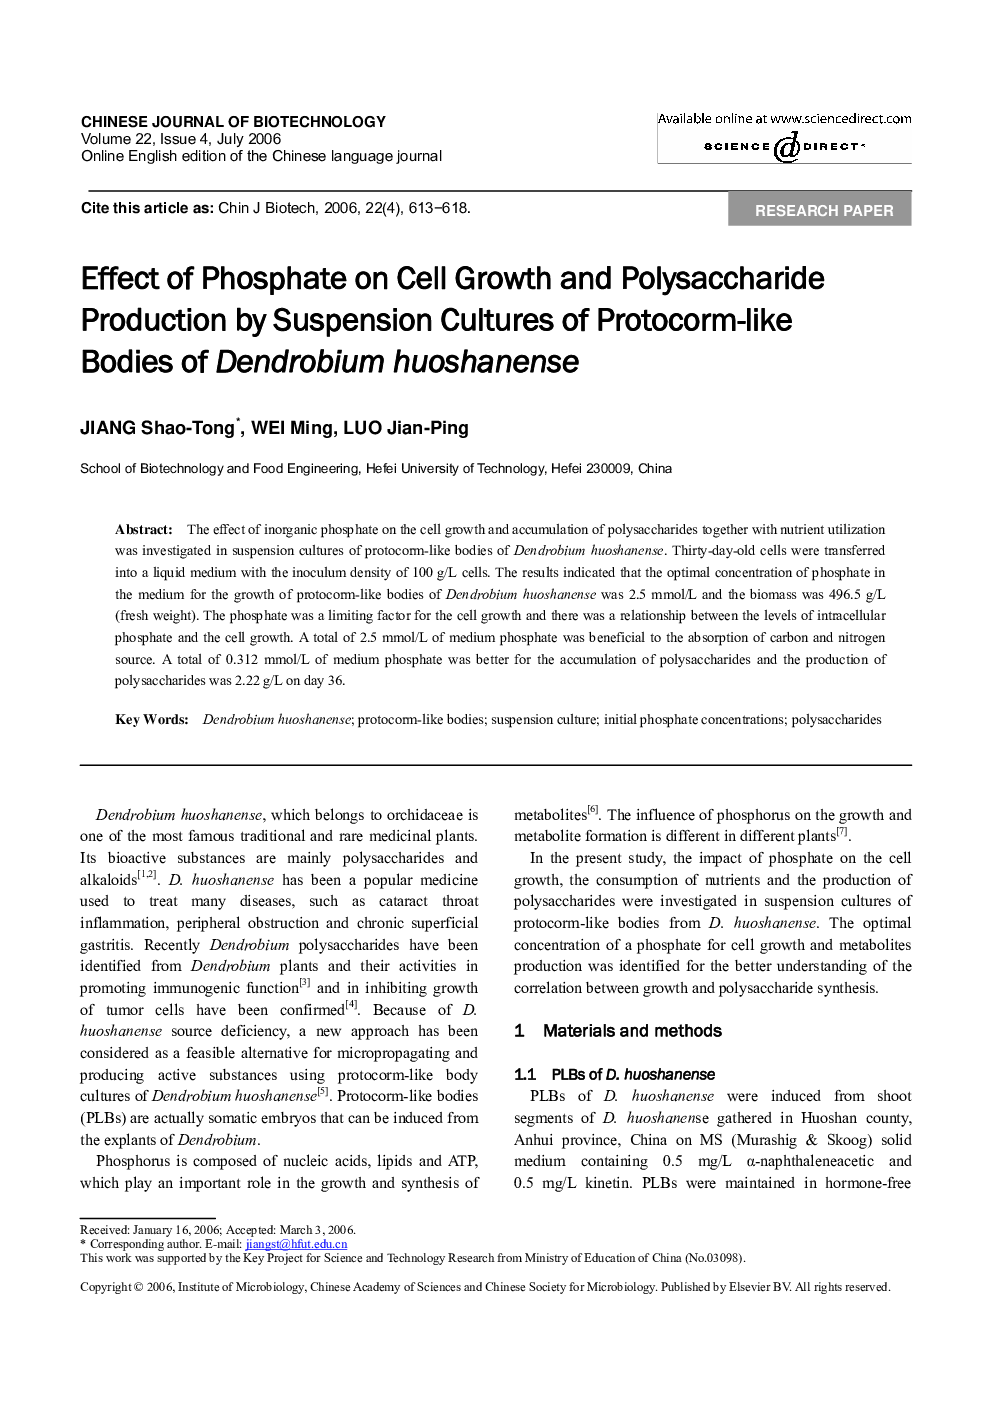 Effect of Phosphate on Cell Growth and Polysaccharide Production by Suspension Cultures of Protocorm-like Bodies of Dendrobium huoshanense